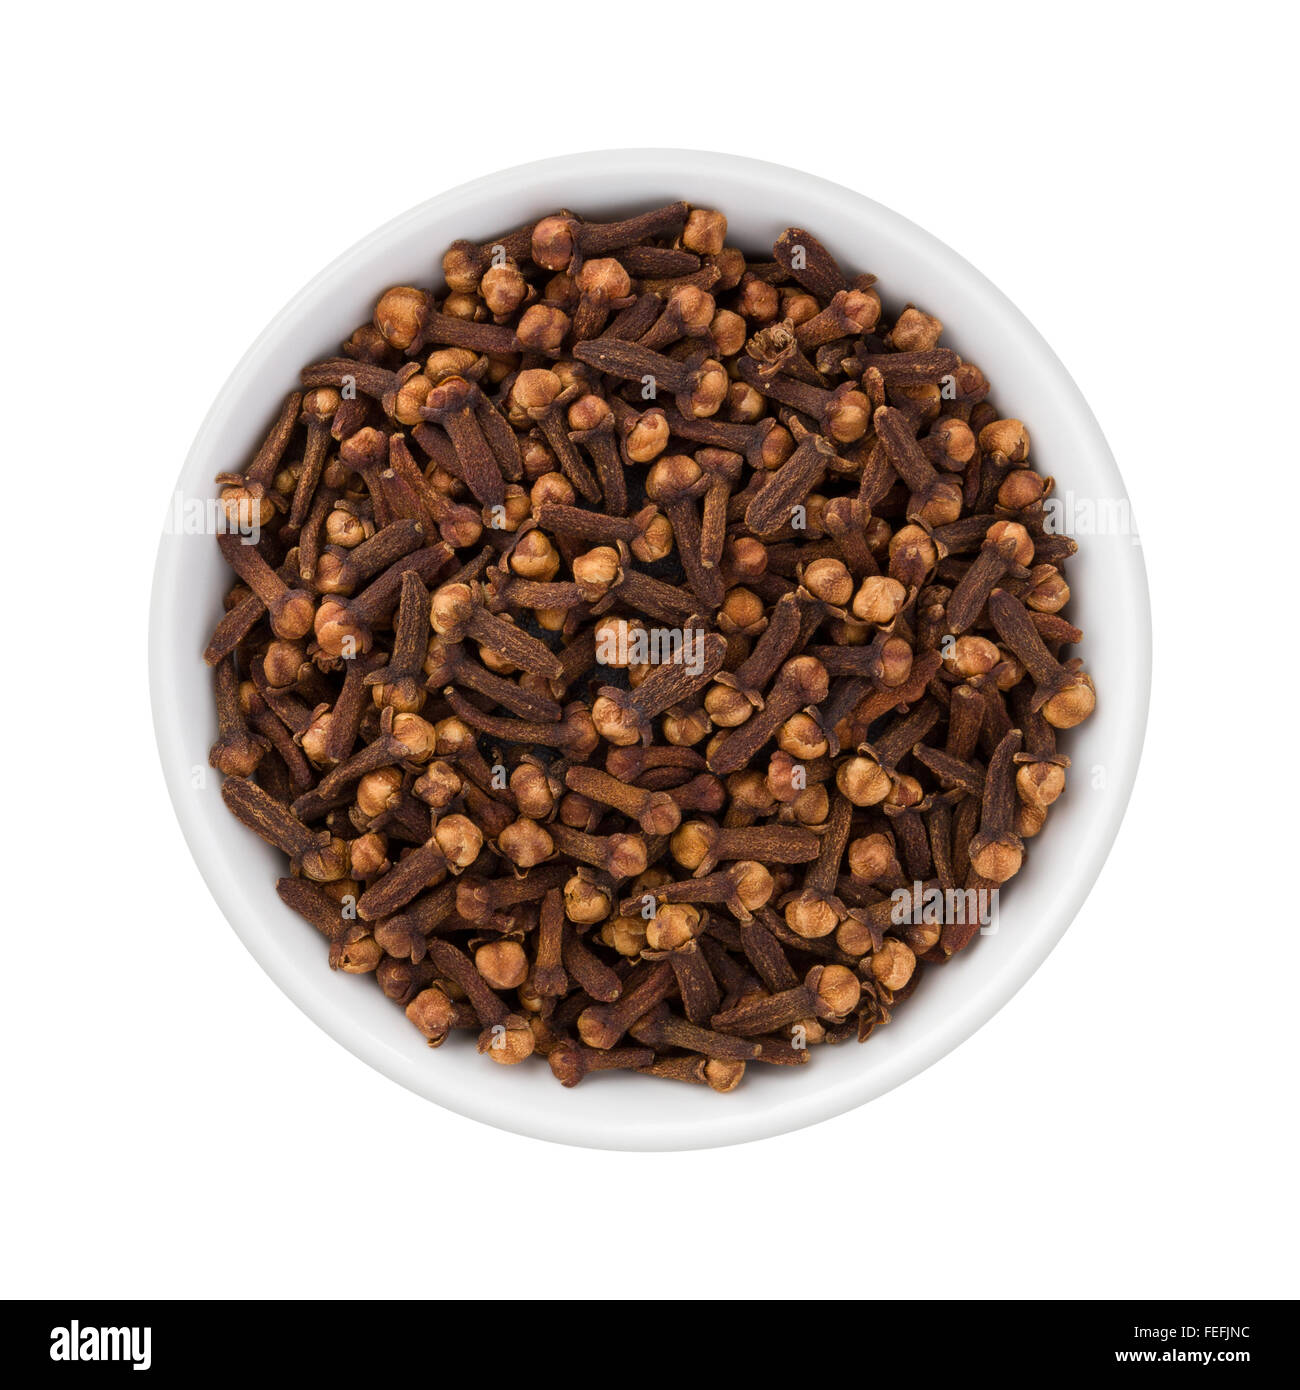 Cloves in a Ceramic Bowl. The image is a cut out, isolated on a white background. Stock Photo